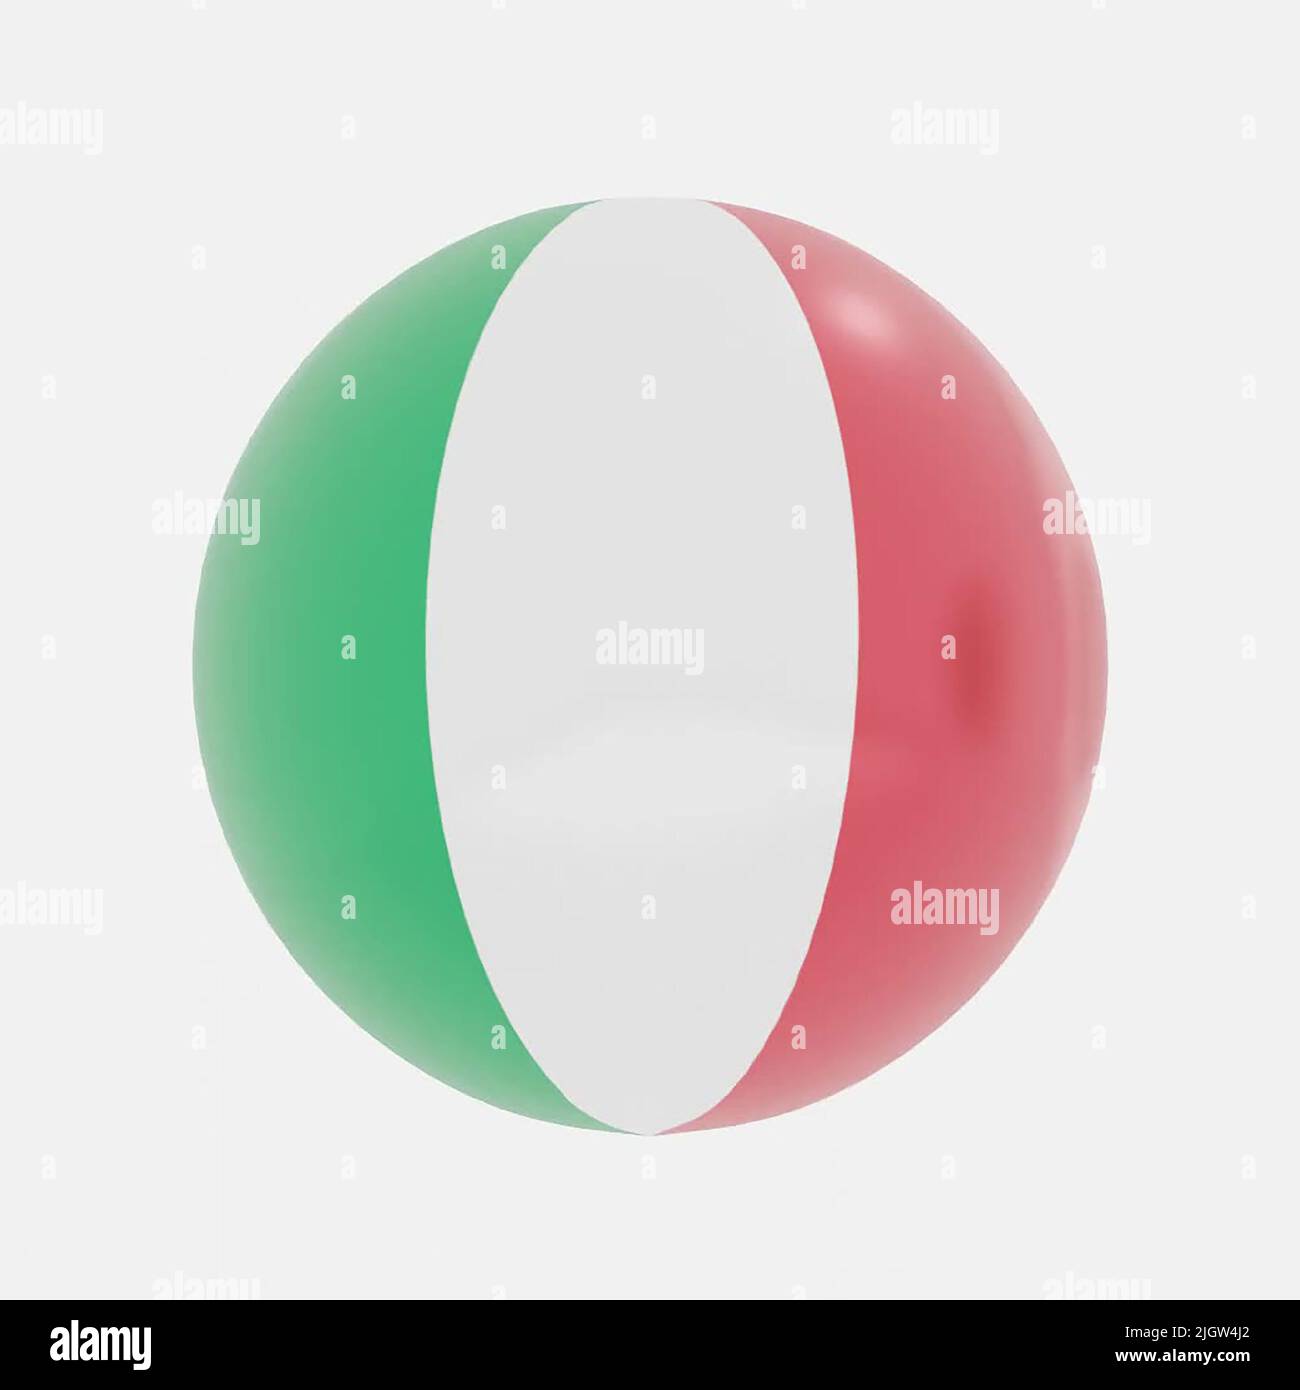 3d render of globe in Italy countries flag for icon or symbol. Stock Photo